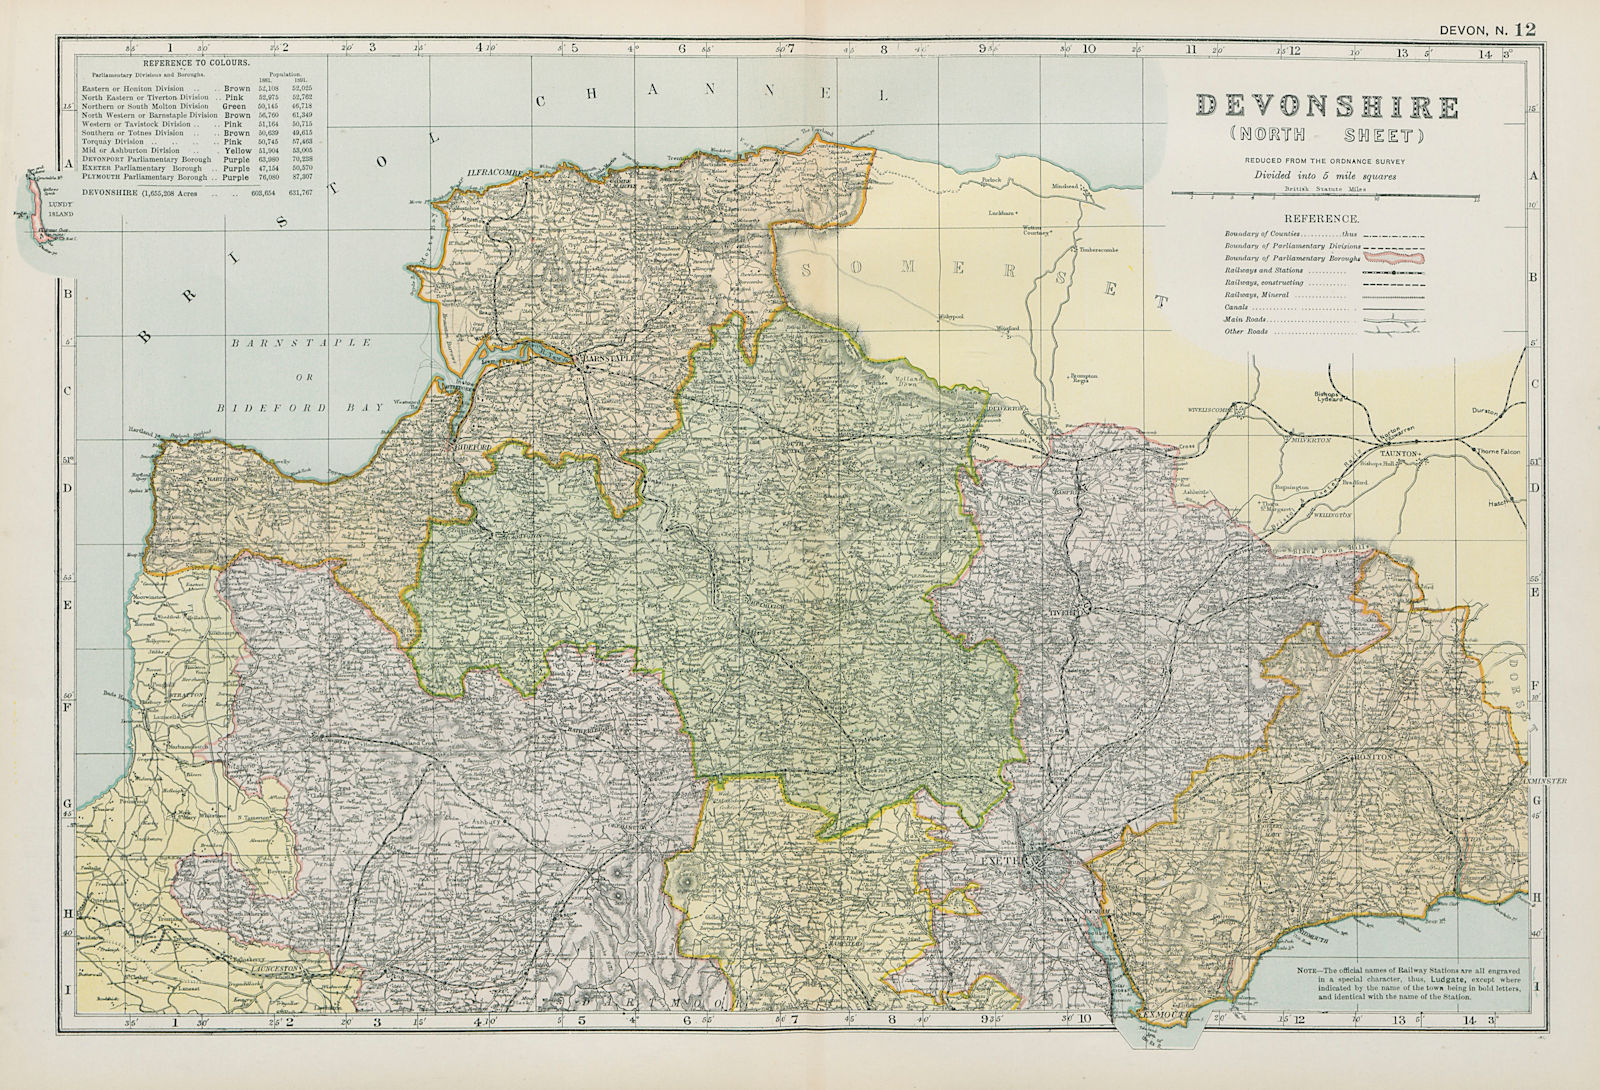 Associate Product DEVONSHIRE (NORTH) . Parliamentary divisions. Parks. Devon. BACON 1900 old map